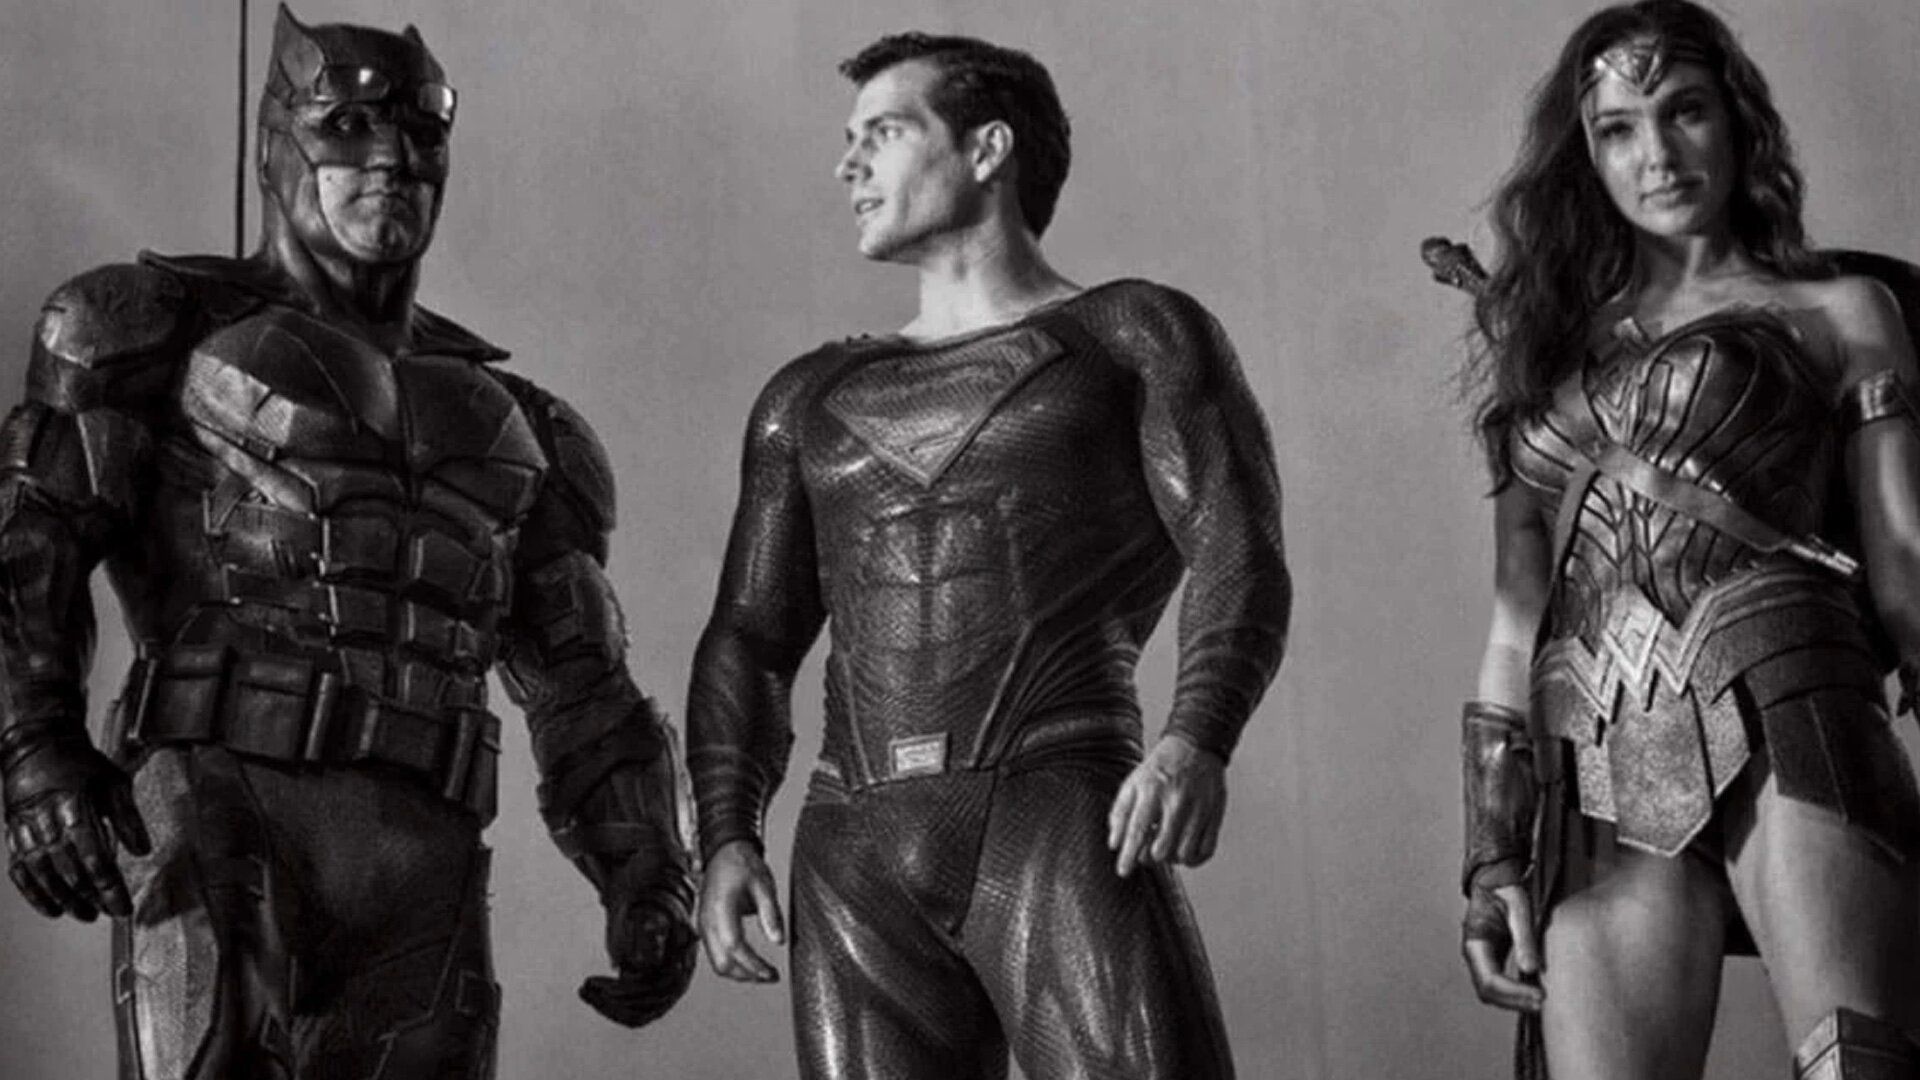 Zack Snyder Wanted To Shoot More Scenes For His JUSTICE LEAGUE Cut with the Cast But WB Said No